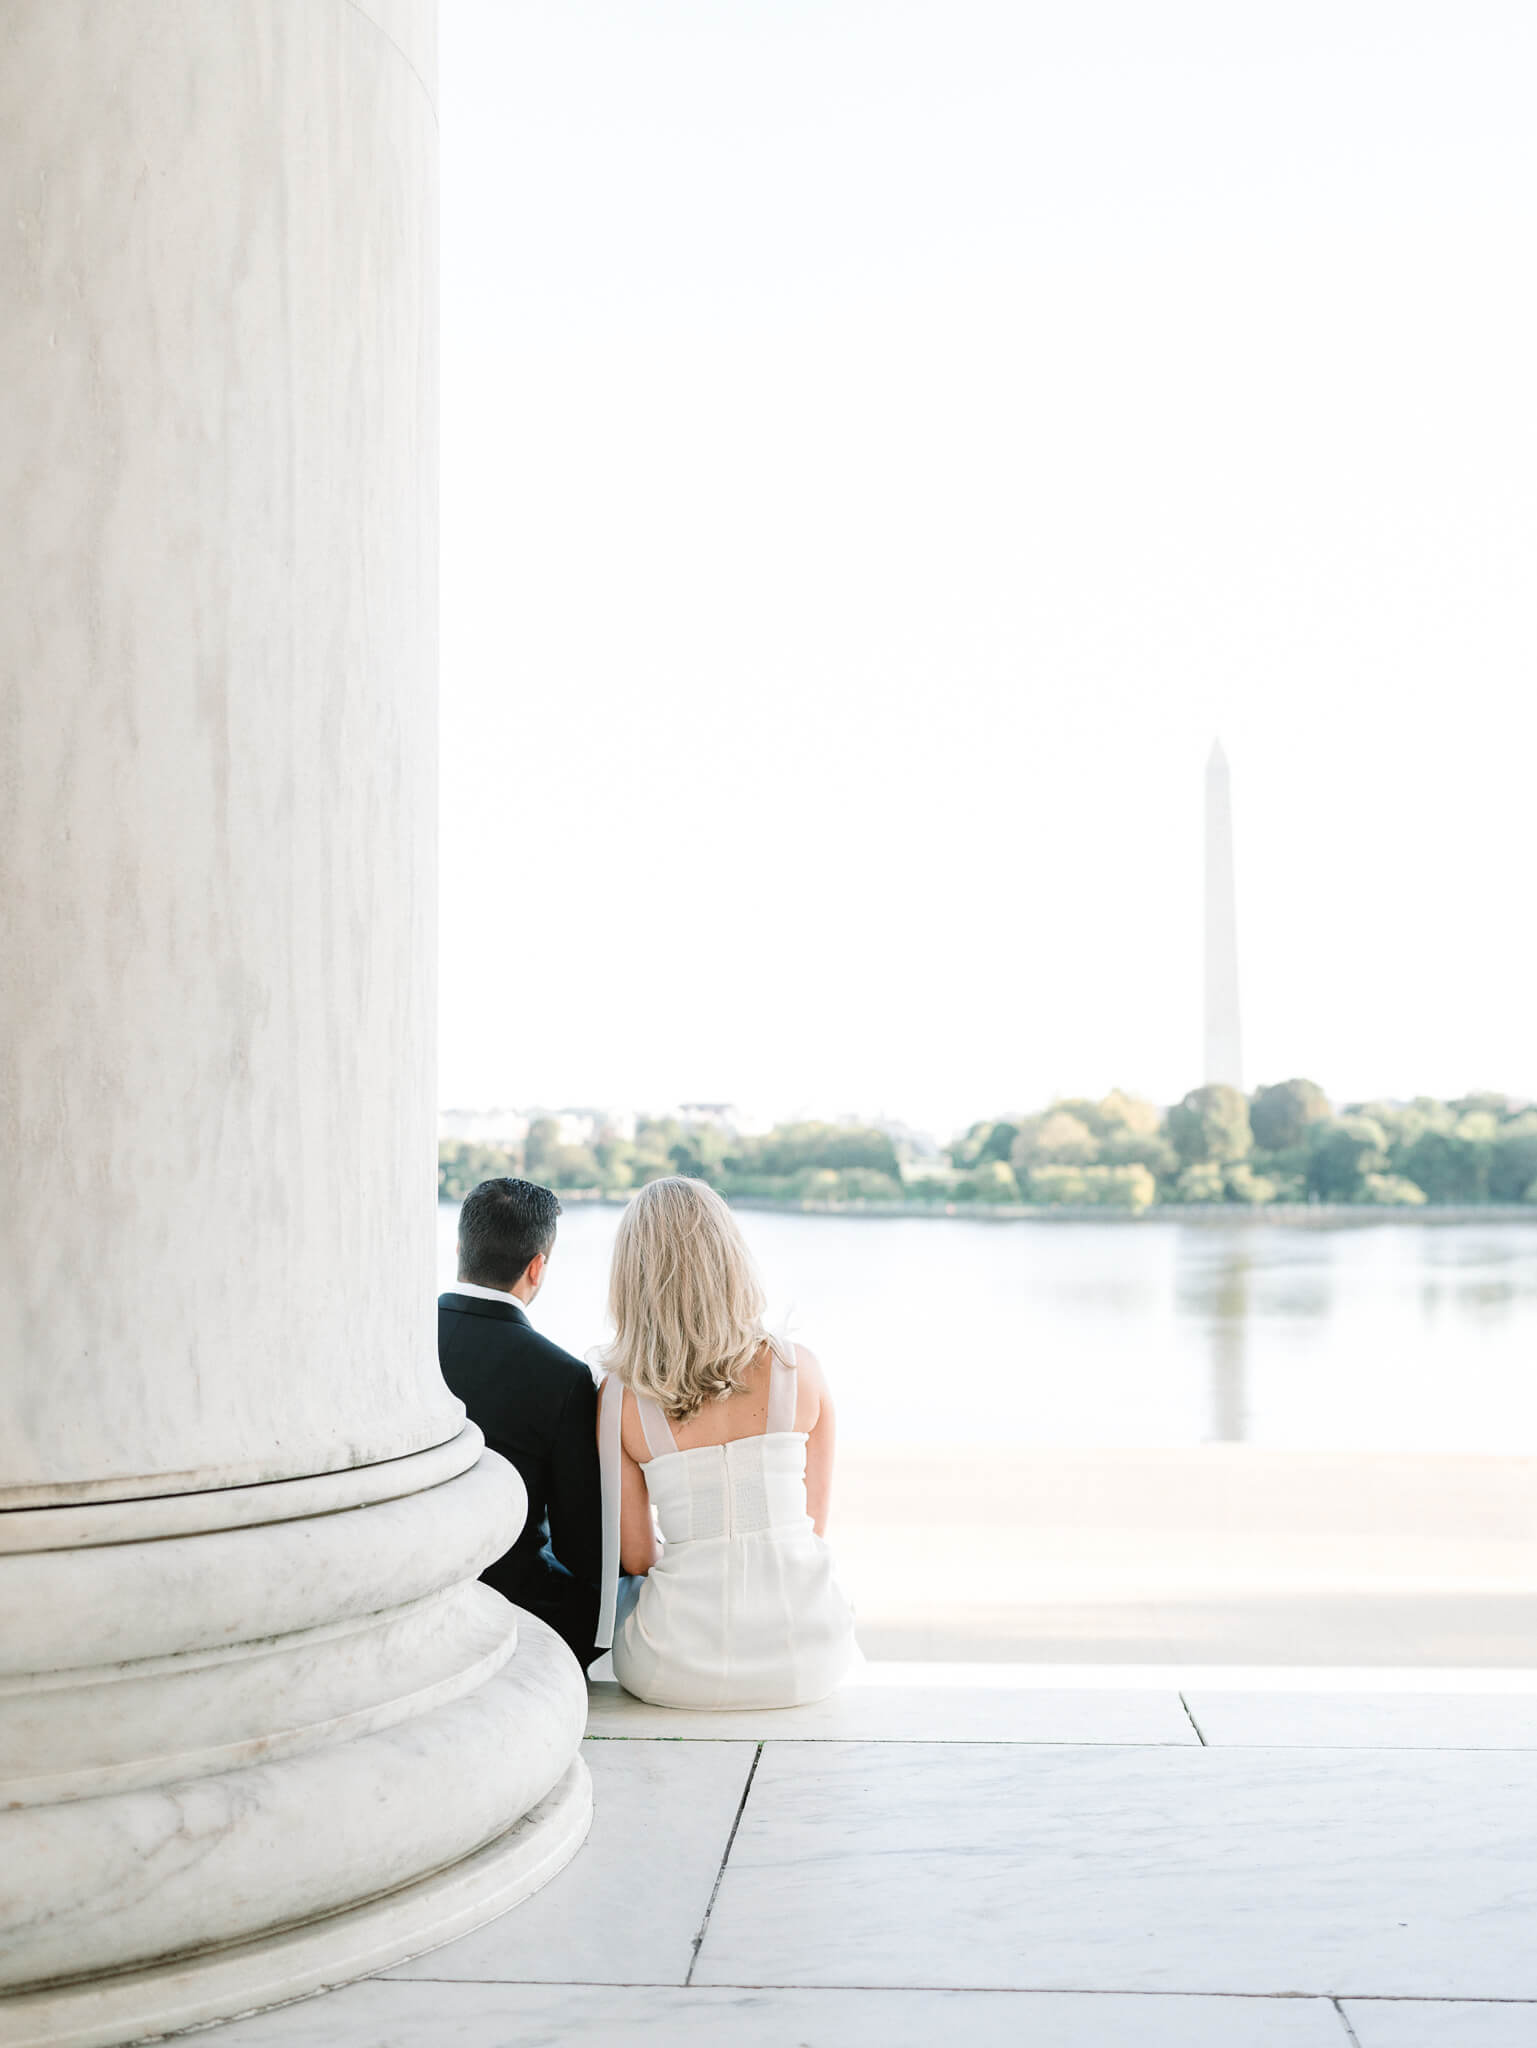 An engaged couple sitting and overlooking the Tidal Basin.